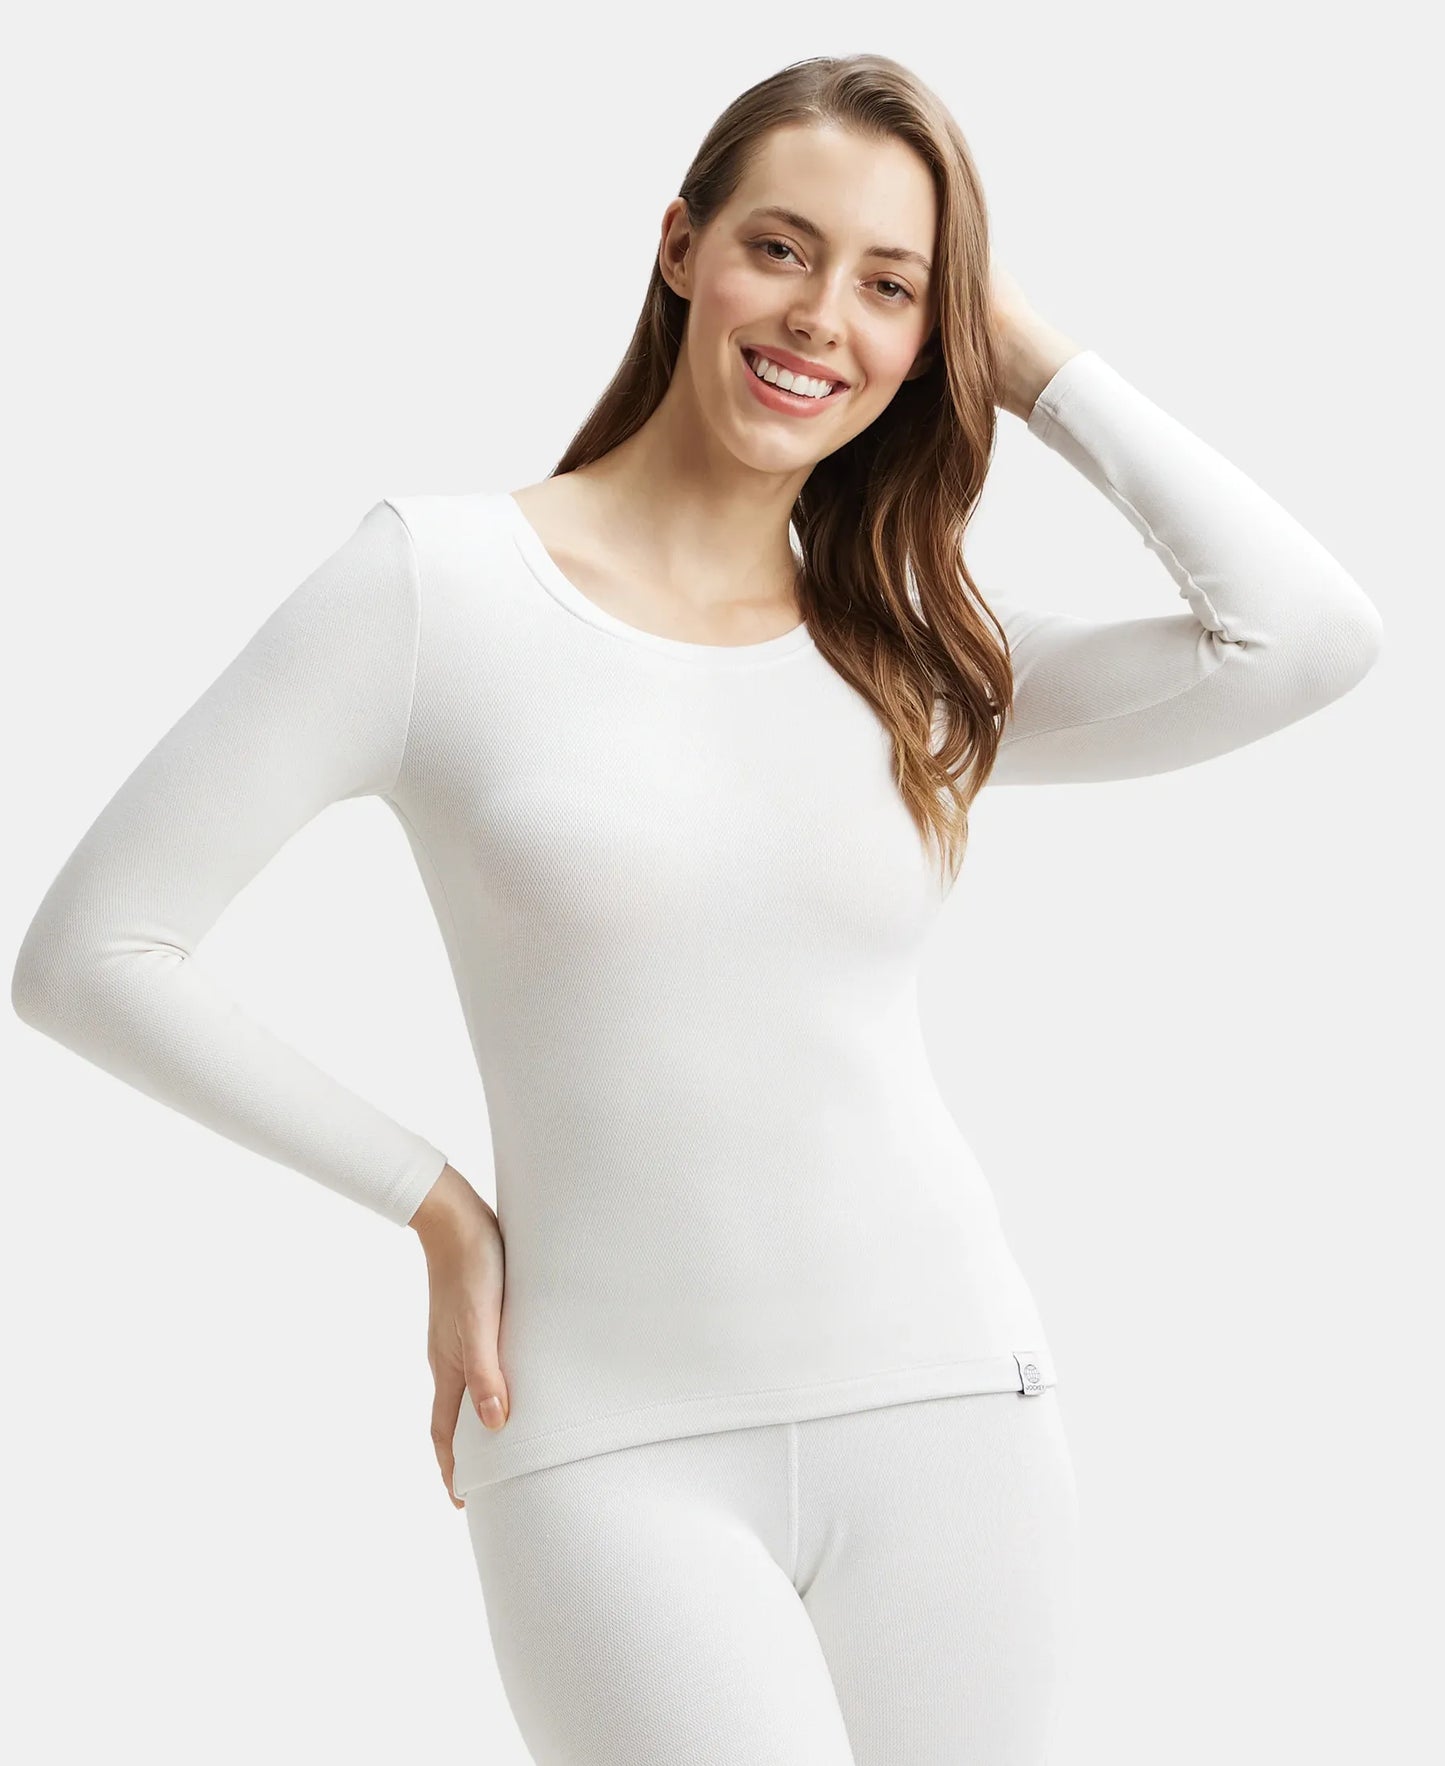 Soft Touch Microfiber Elastane Stretch Fleece Fabric Full Sleeve Thermal Top with StayWarm Technology - Light Bright White-5